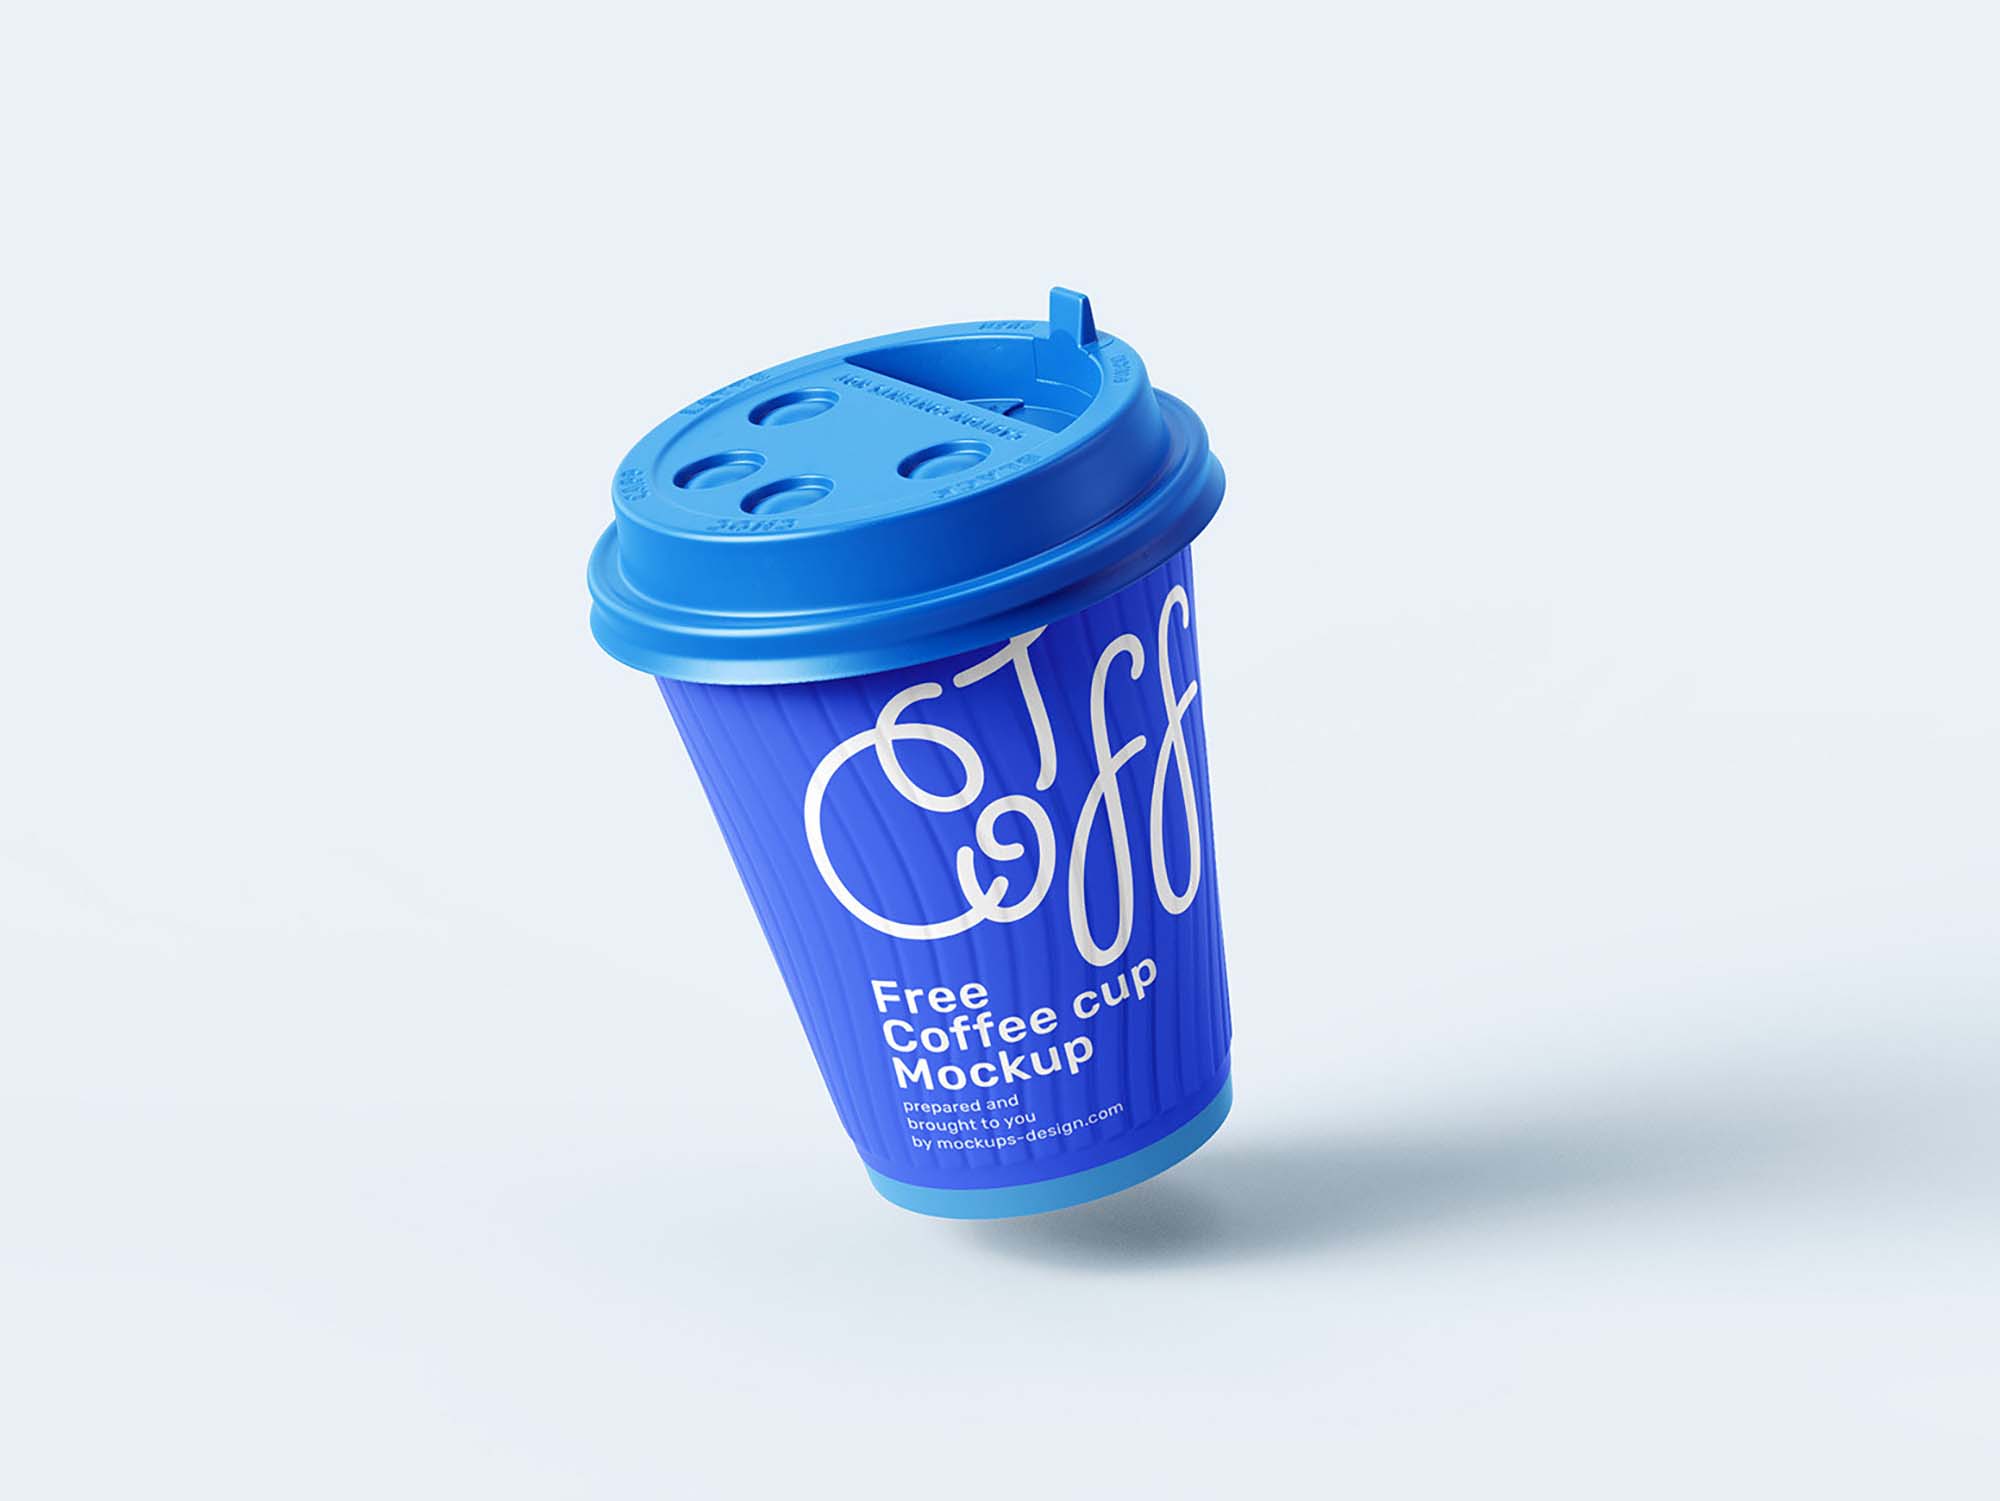 Set of free four paper coffee cup mockups